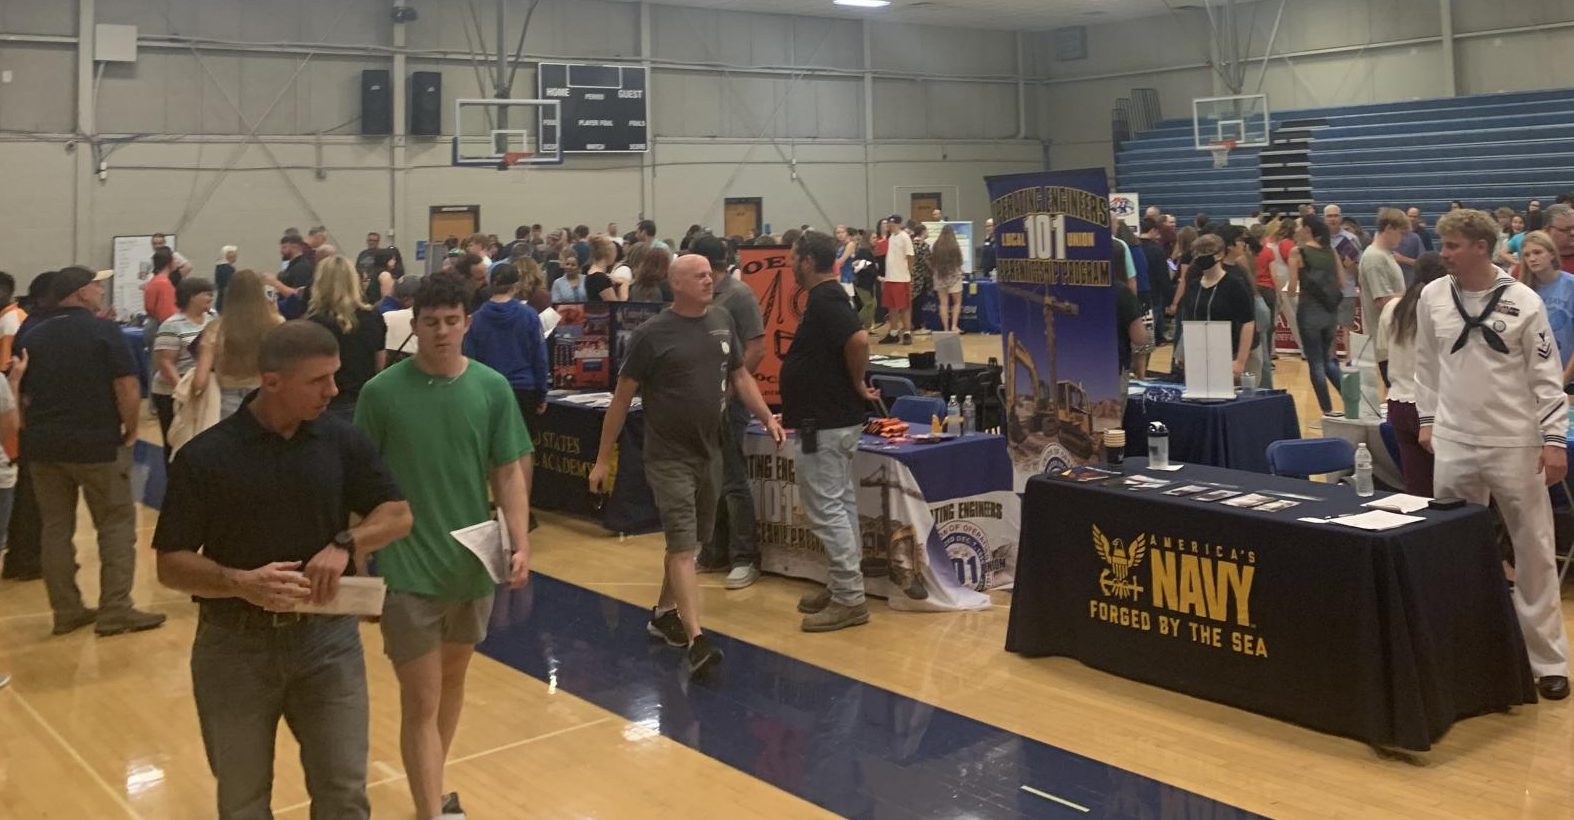 Students crowding around each college booth in Cokley gym during the LPS college fair on Sept. 12.